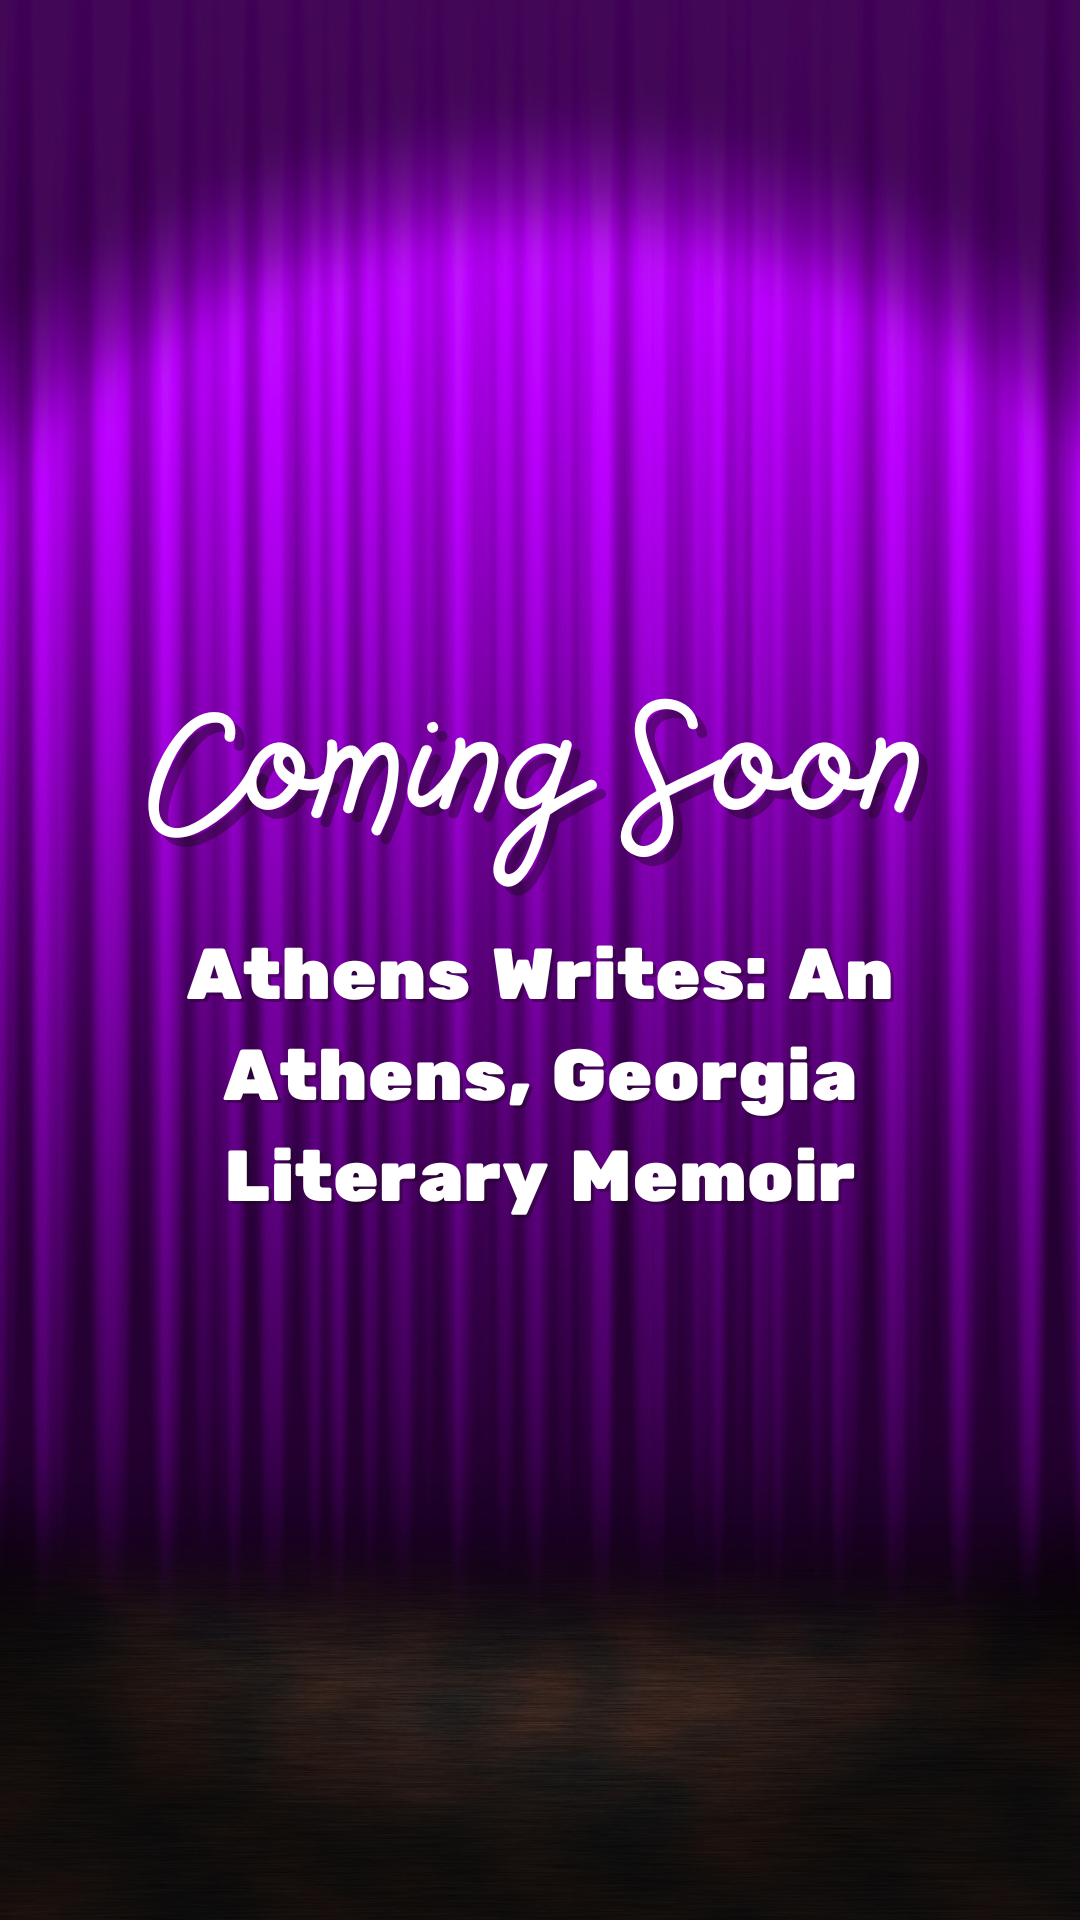 Coming Soon: Athens Writes: An Athens, Georgia Literary Memoir by Donny Bailey Seagraves